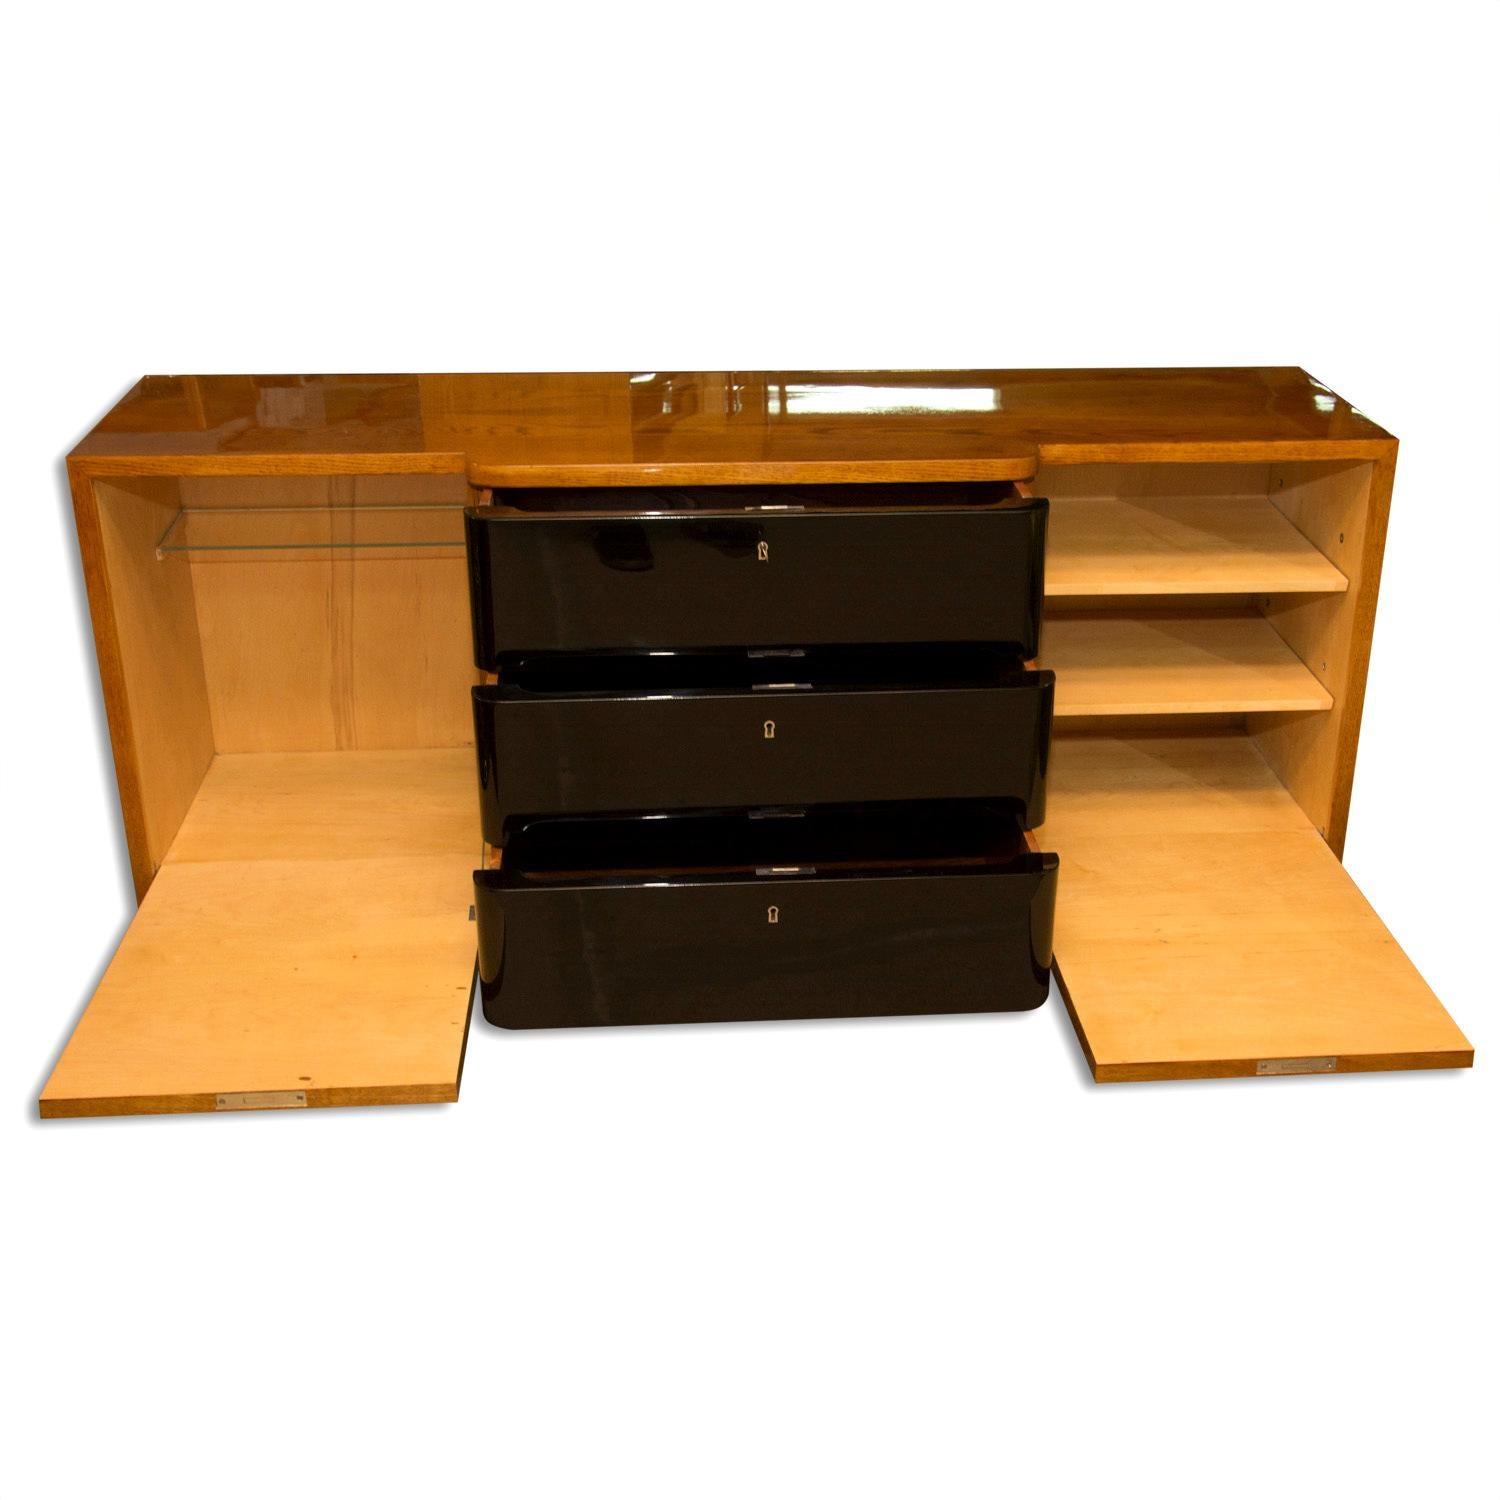 Czech Midcentury ART DECO Sideboard, Chest of Drawers, Bohemia, 1940´s